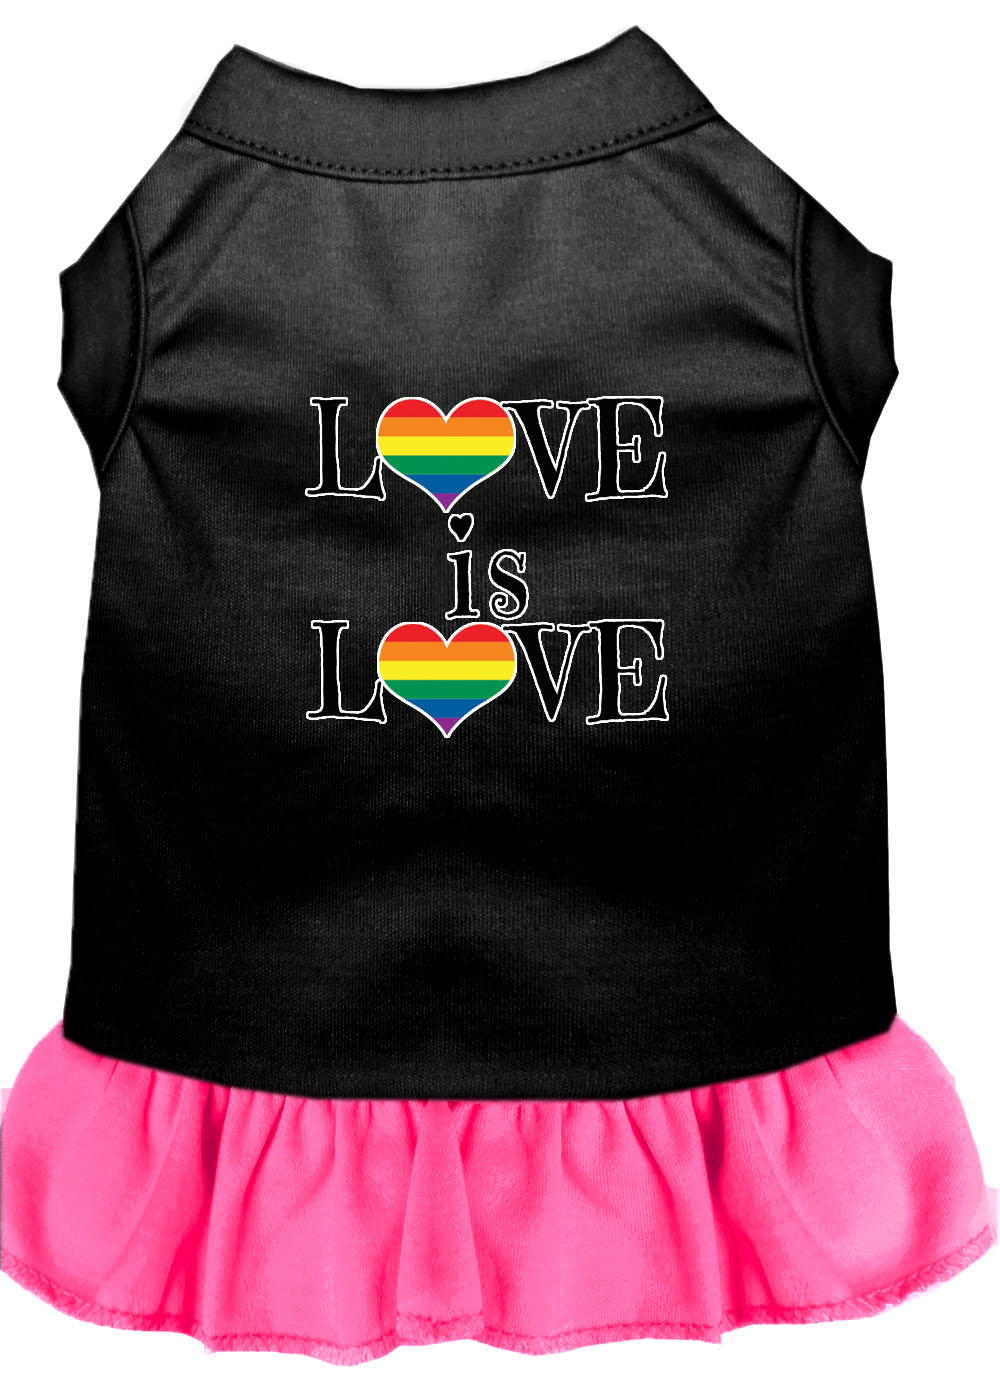 Love is Love Screen Print Dog Dress Black with Bright Pink Sm